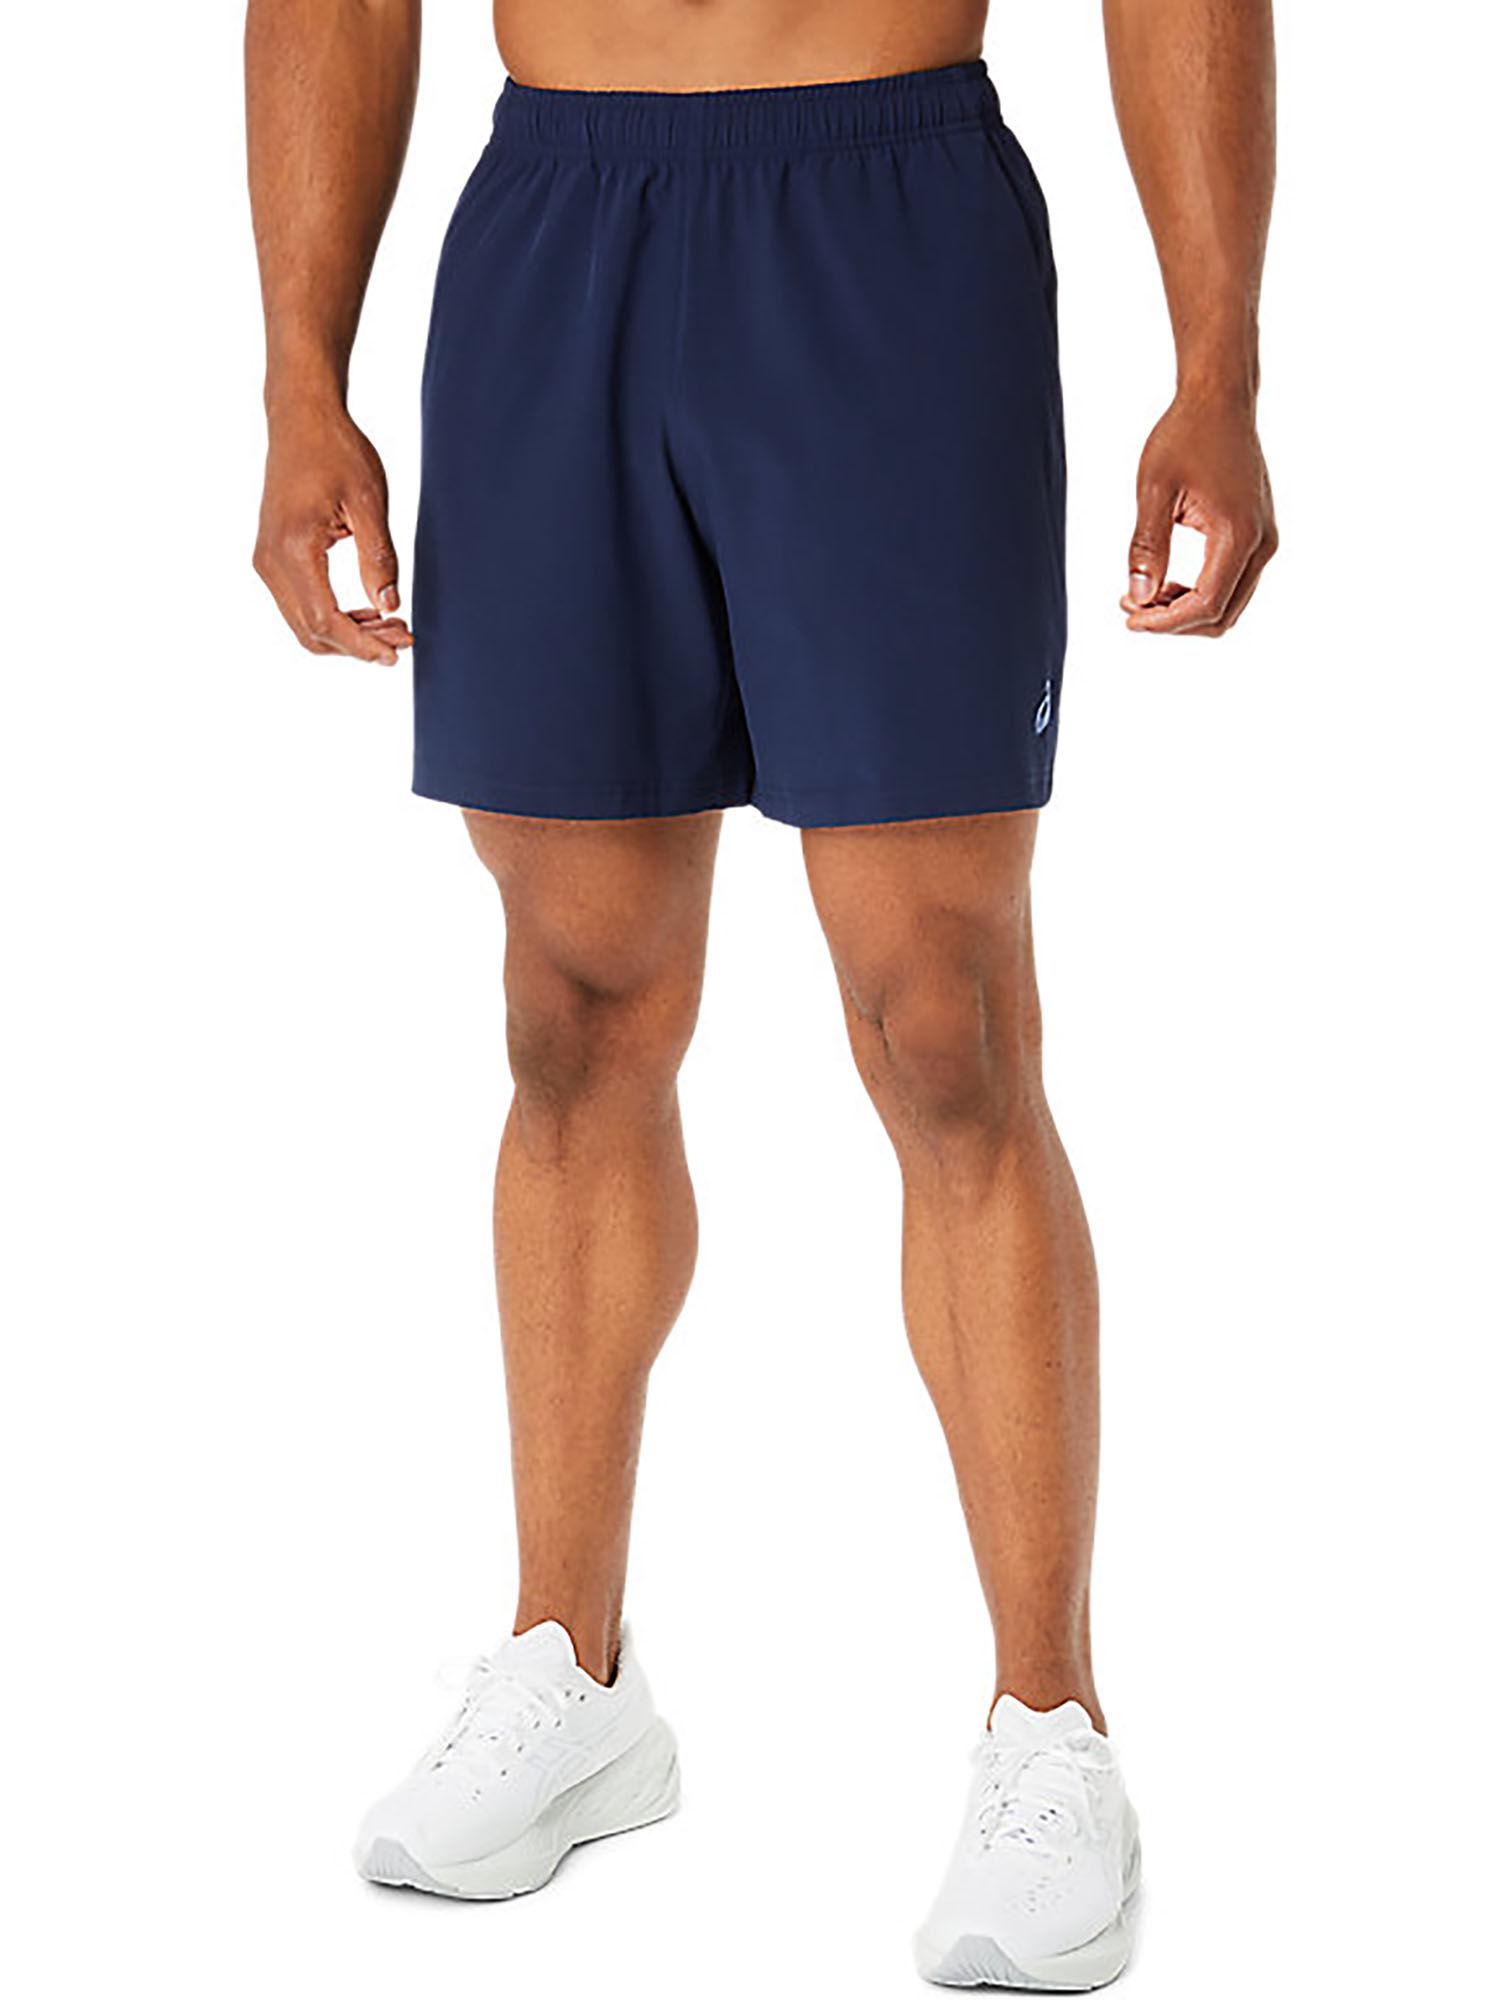 spiral embroidery 7in woven men blue shorts